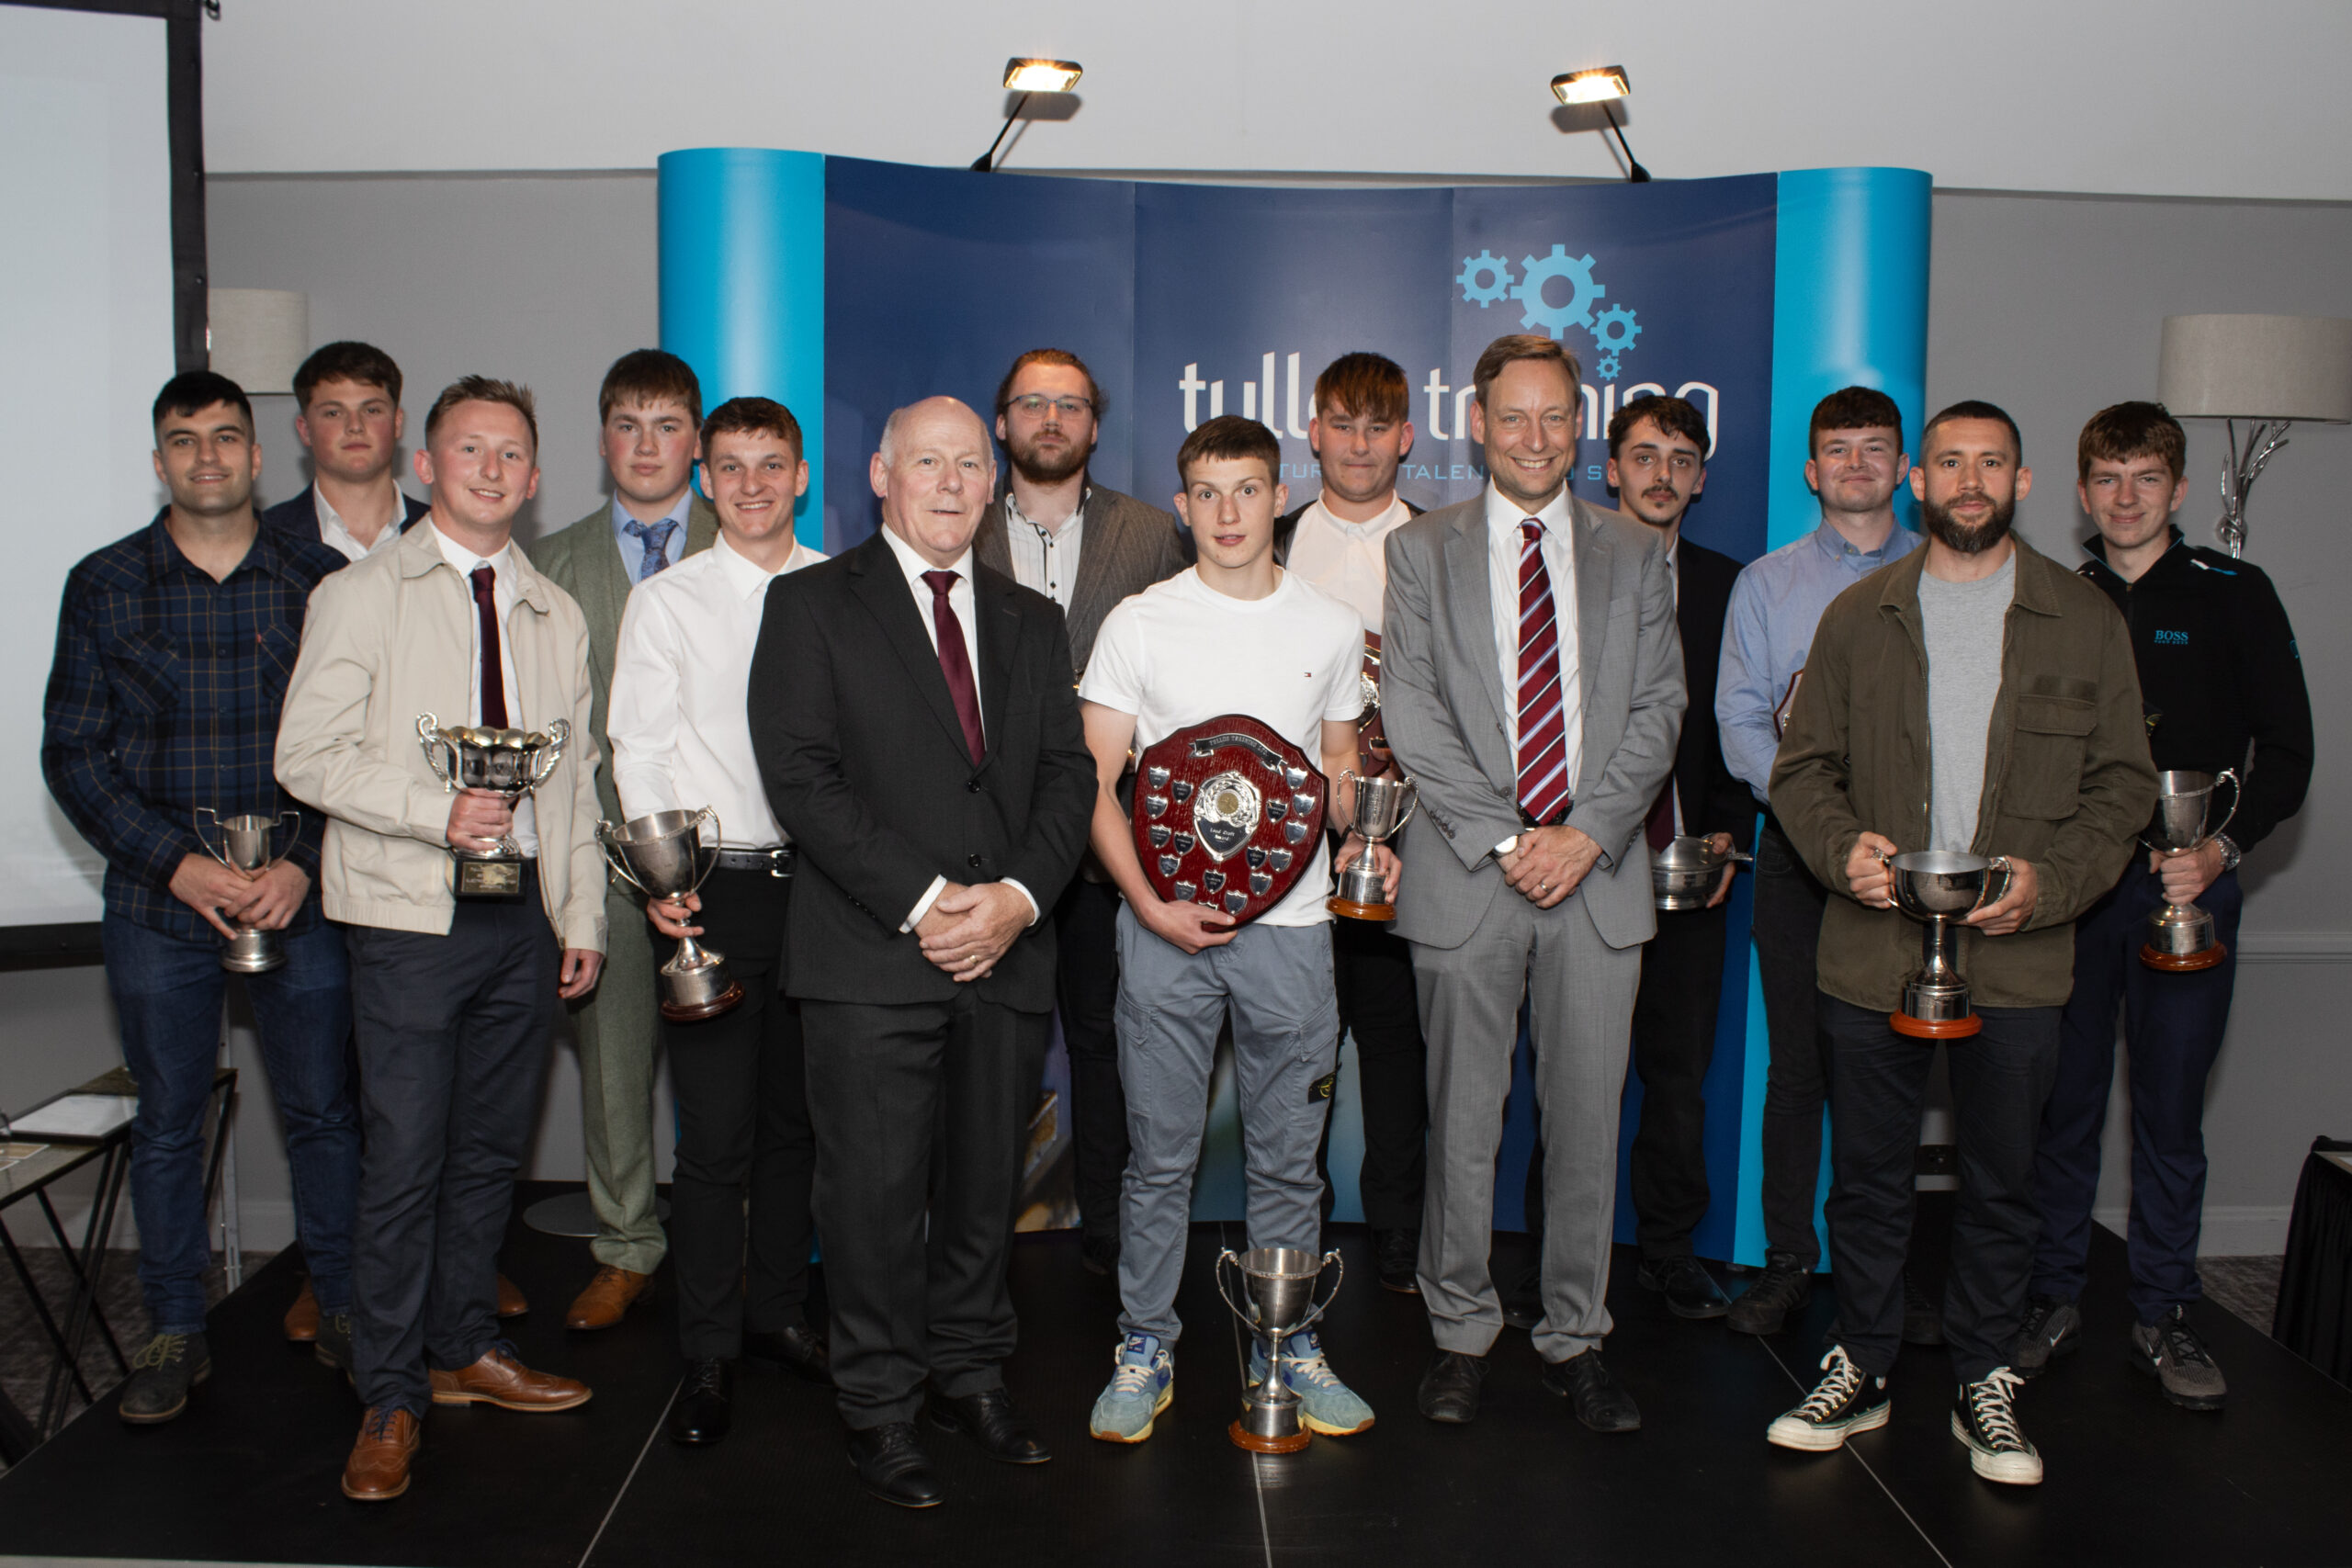 Tullos Training's 2023 Annual Award Winners pictured with CEO, Iain Garrett, and guest speaker, Liam Kerr MSP.